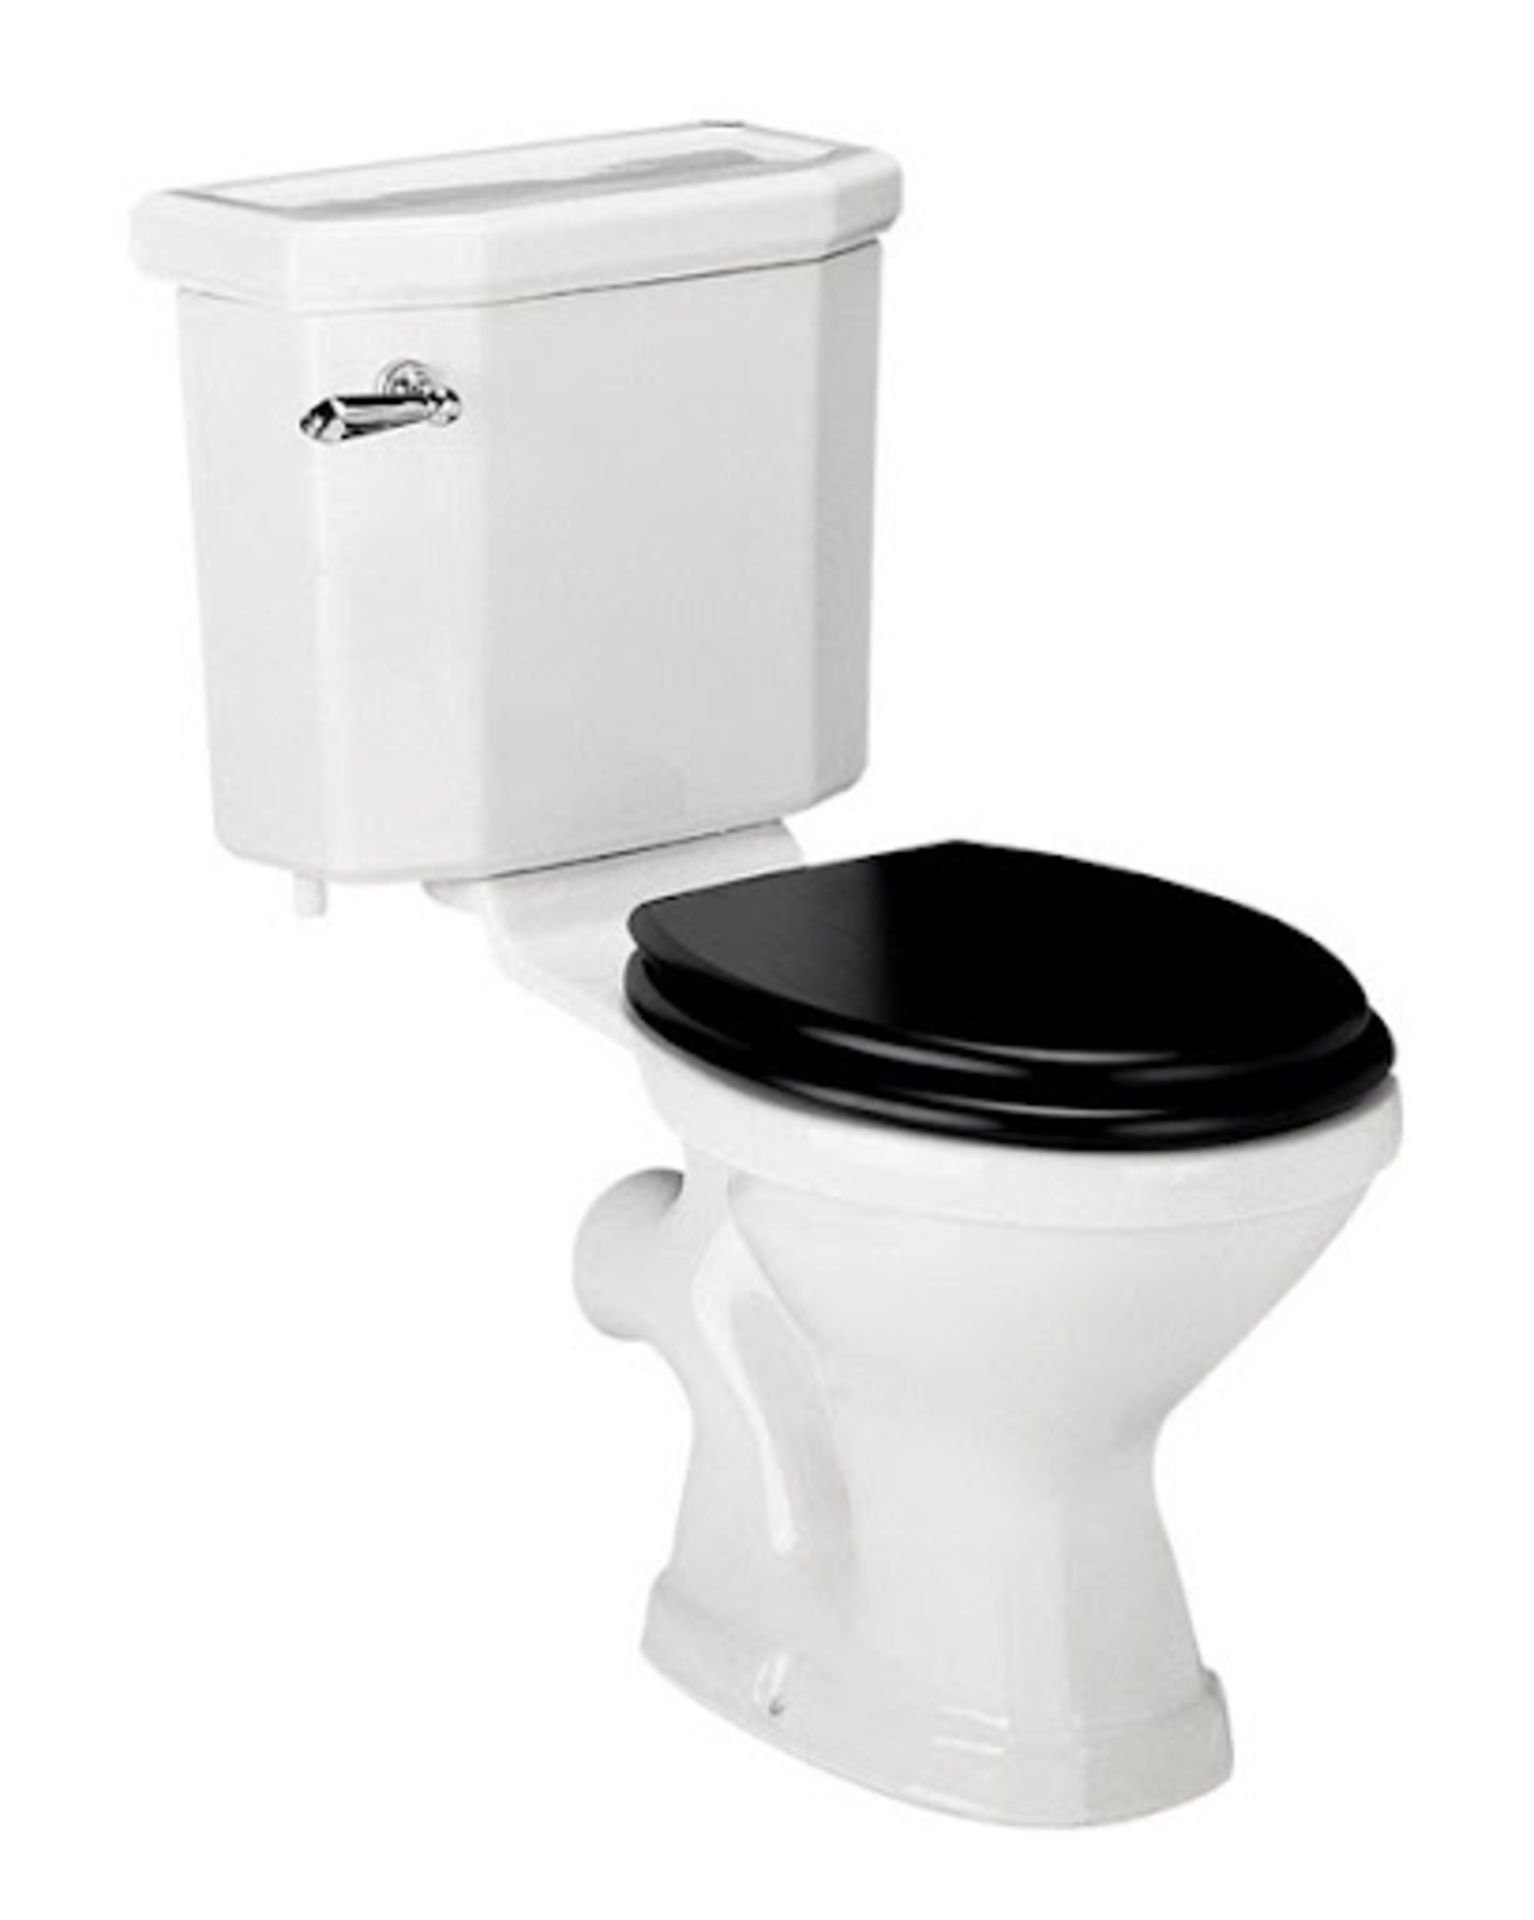 Twyford Clarice Close Coupled Toilet Set. Product Code: Cl1148Wh The Clarice Close Coupled WC... - Image 2 of 2